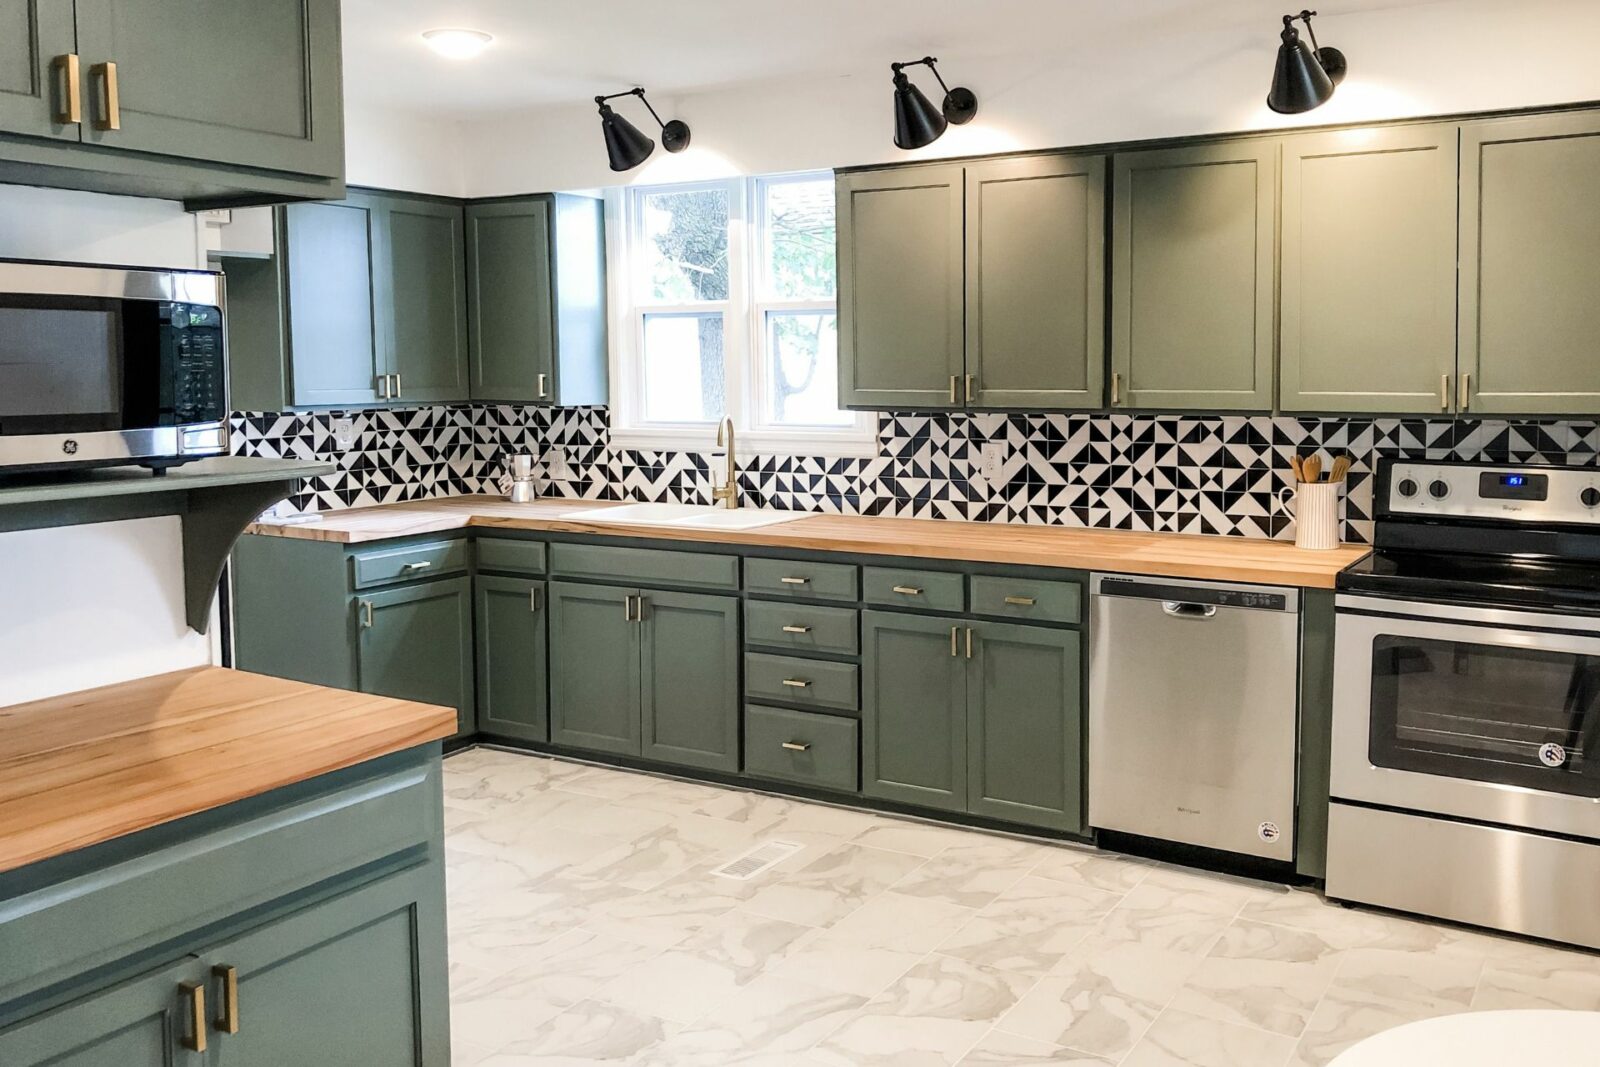 sage green kitchen cabinets with butcher block countertops